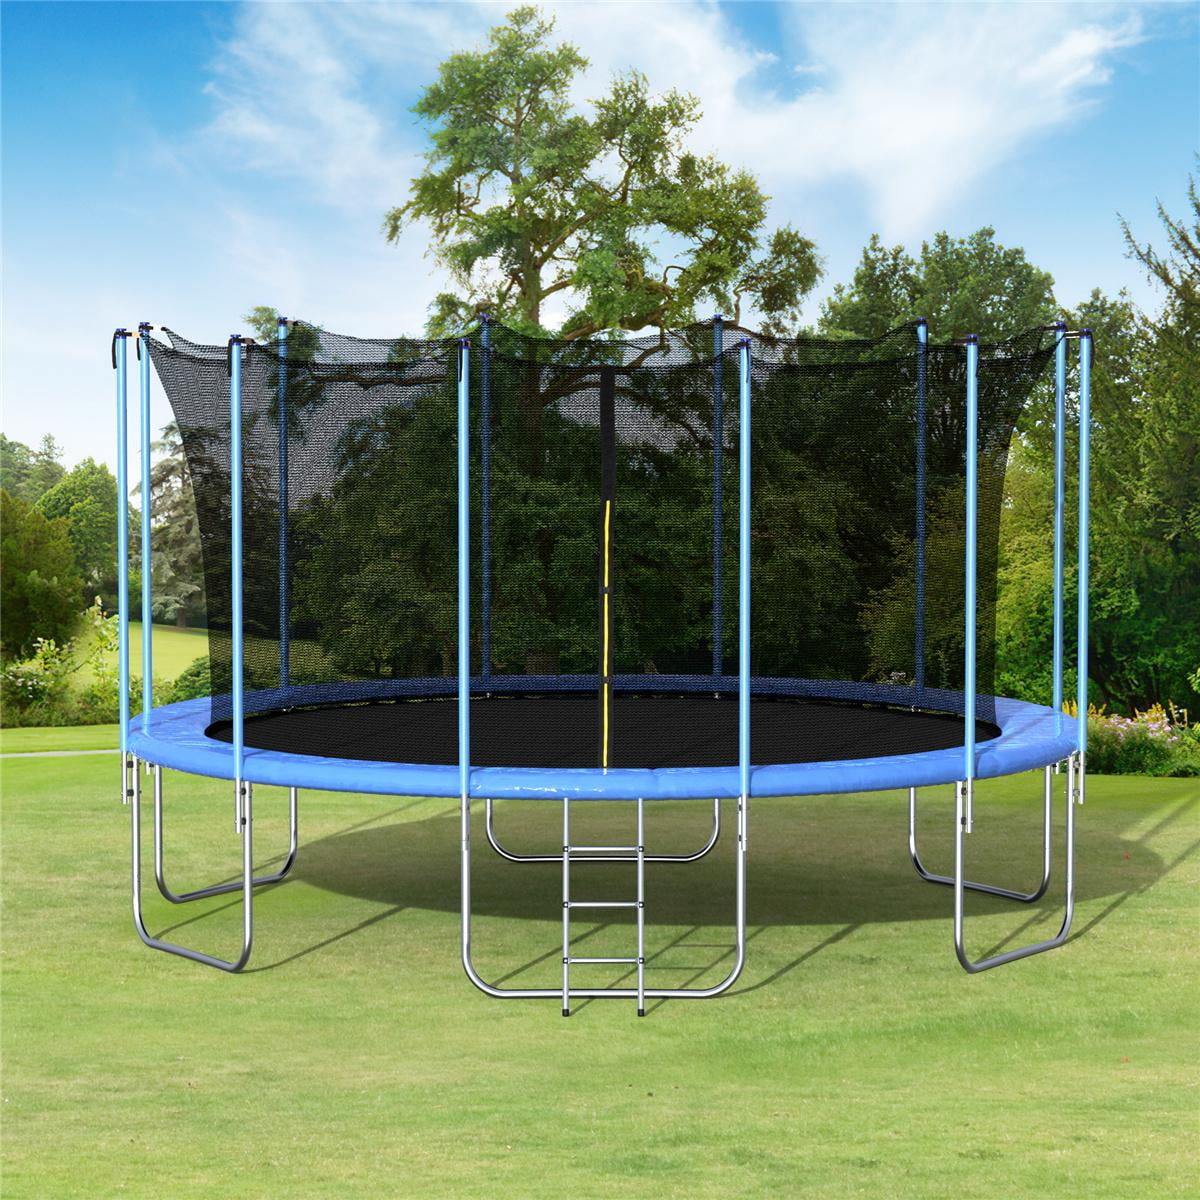 Details about   12/10/6FT Kids Trampoline w/Enclosure Net Jumping Mat&Spring Cover Padding Yard 